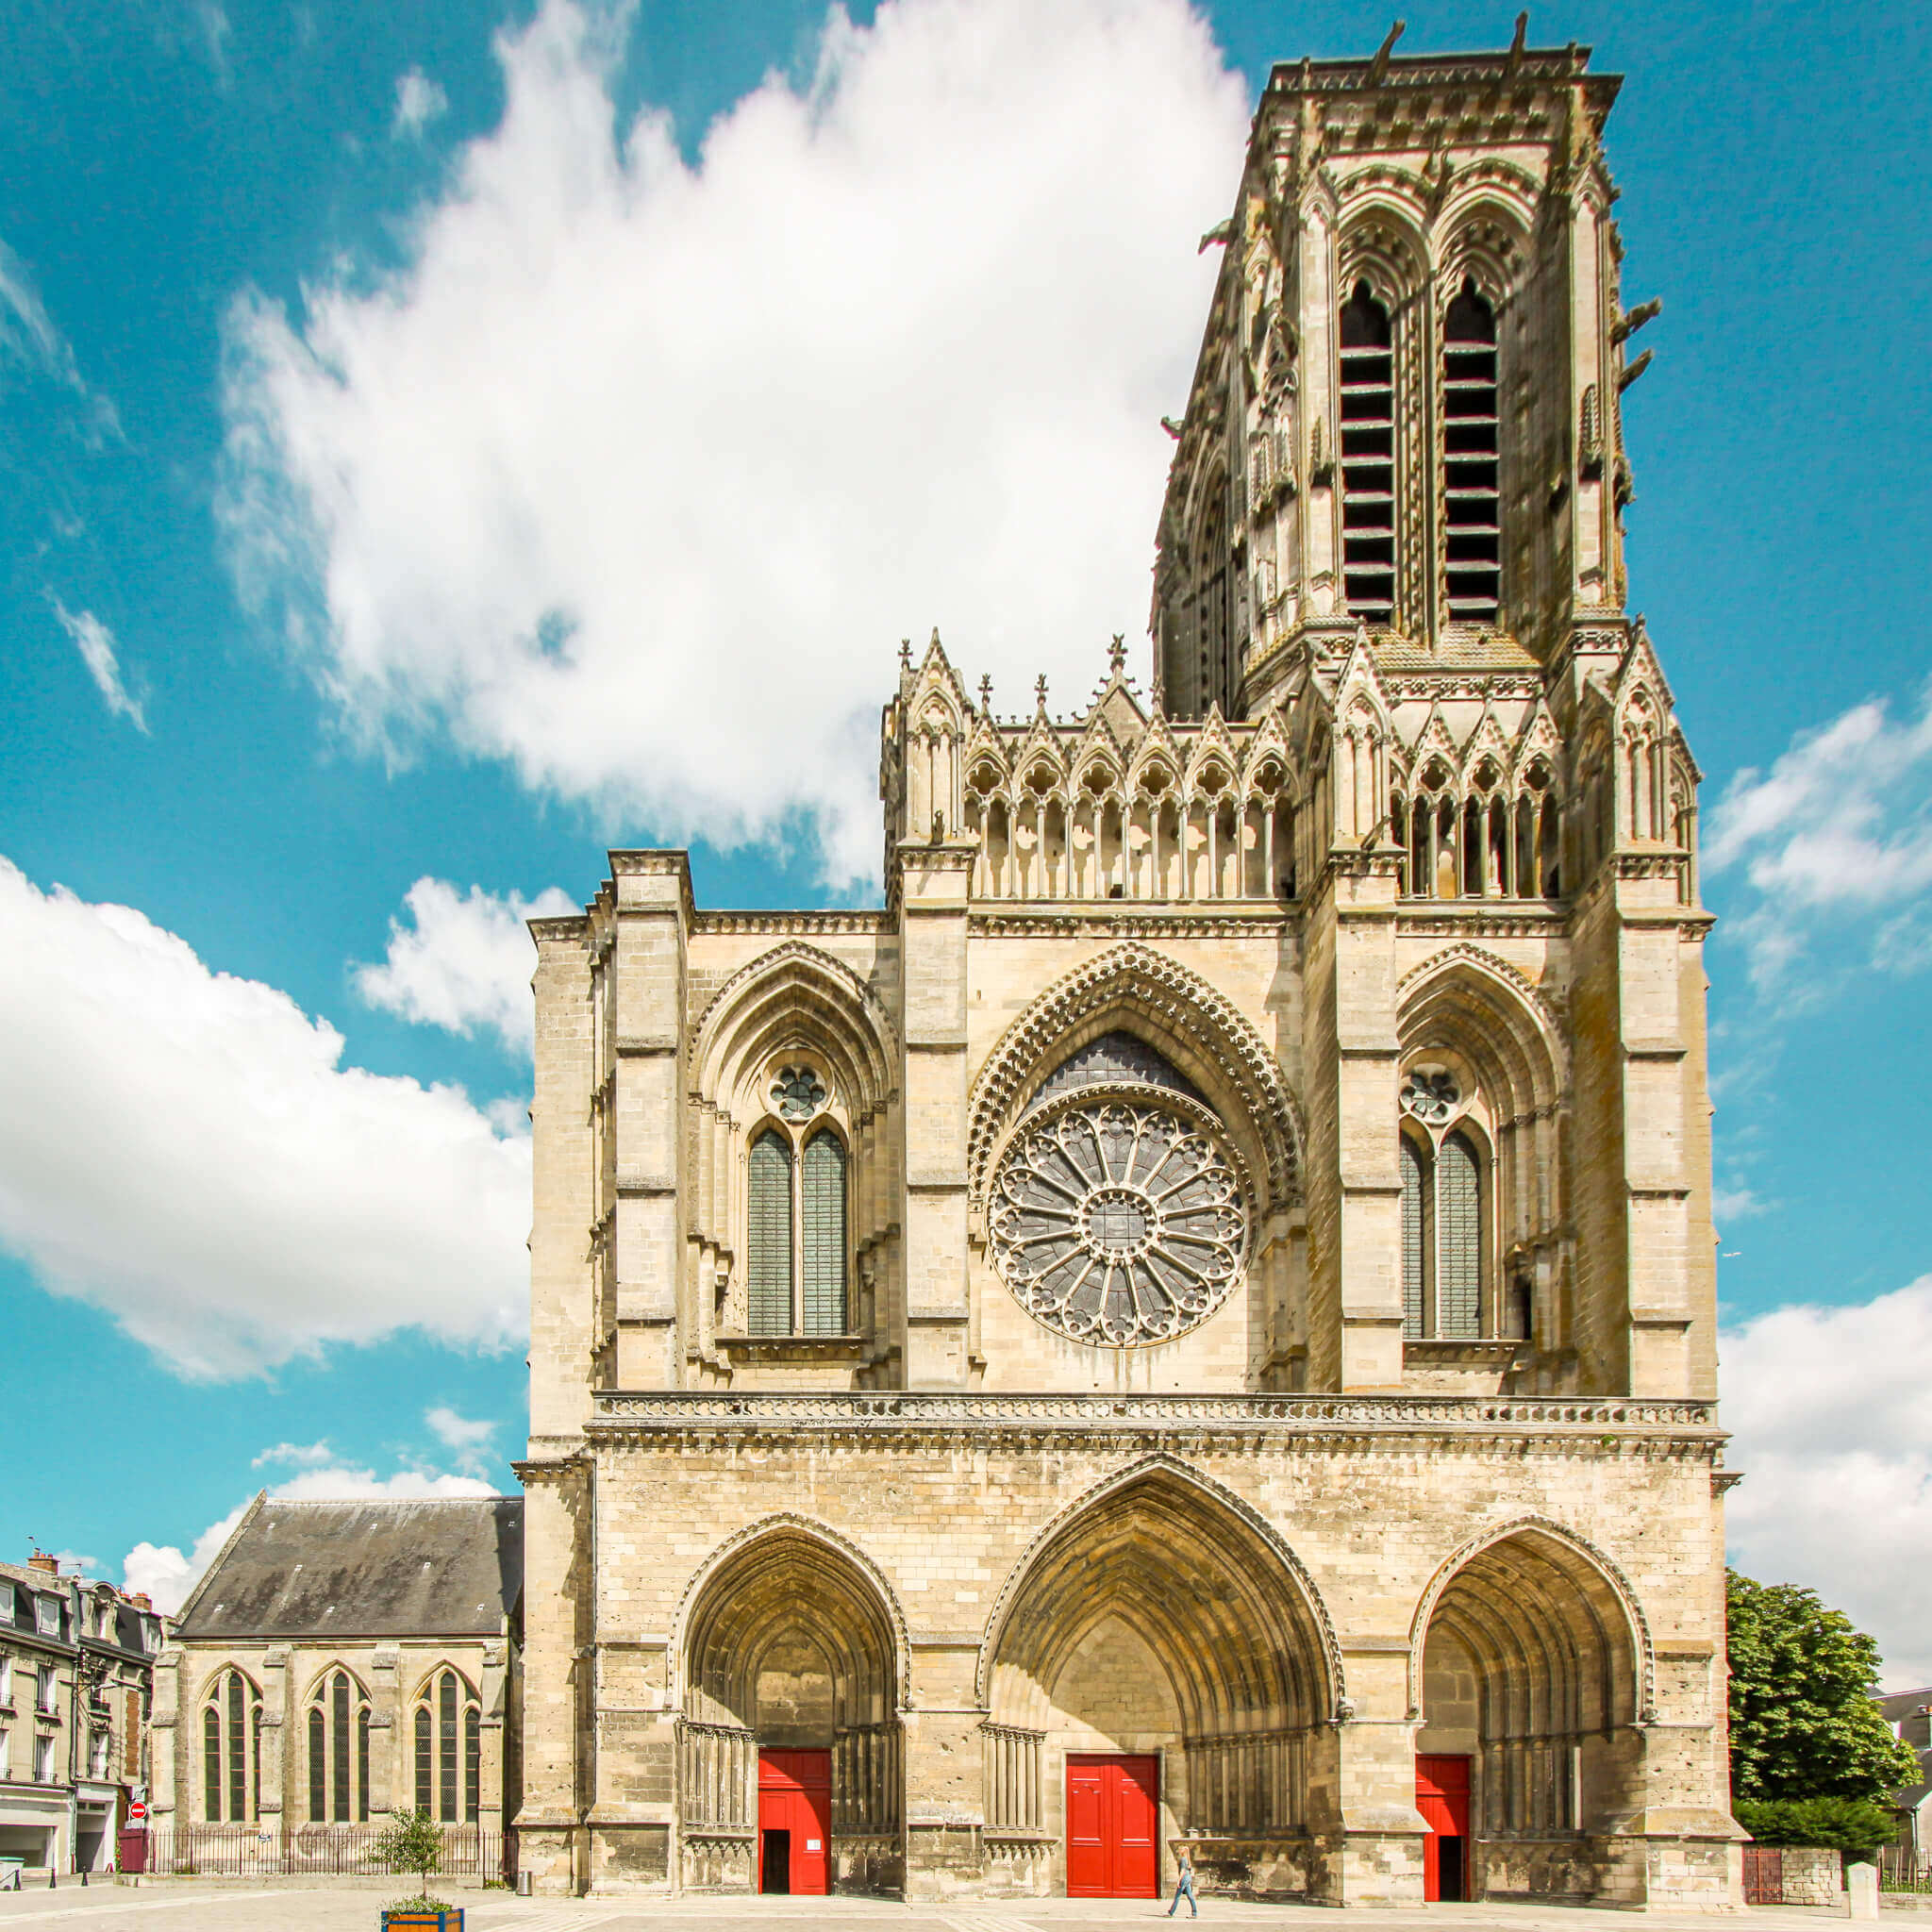 The Soissons Cathedral, officially Saint-Gervais and Saint-Protais Cathedral, a 12th century Gothic cathedral in Soissons, France